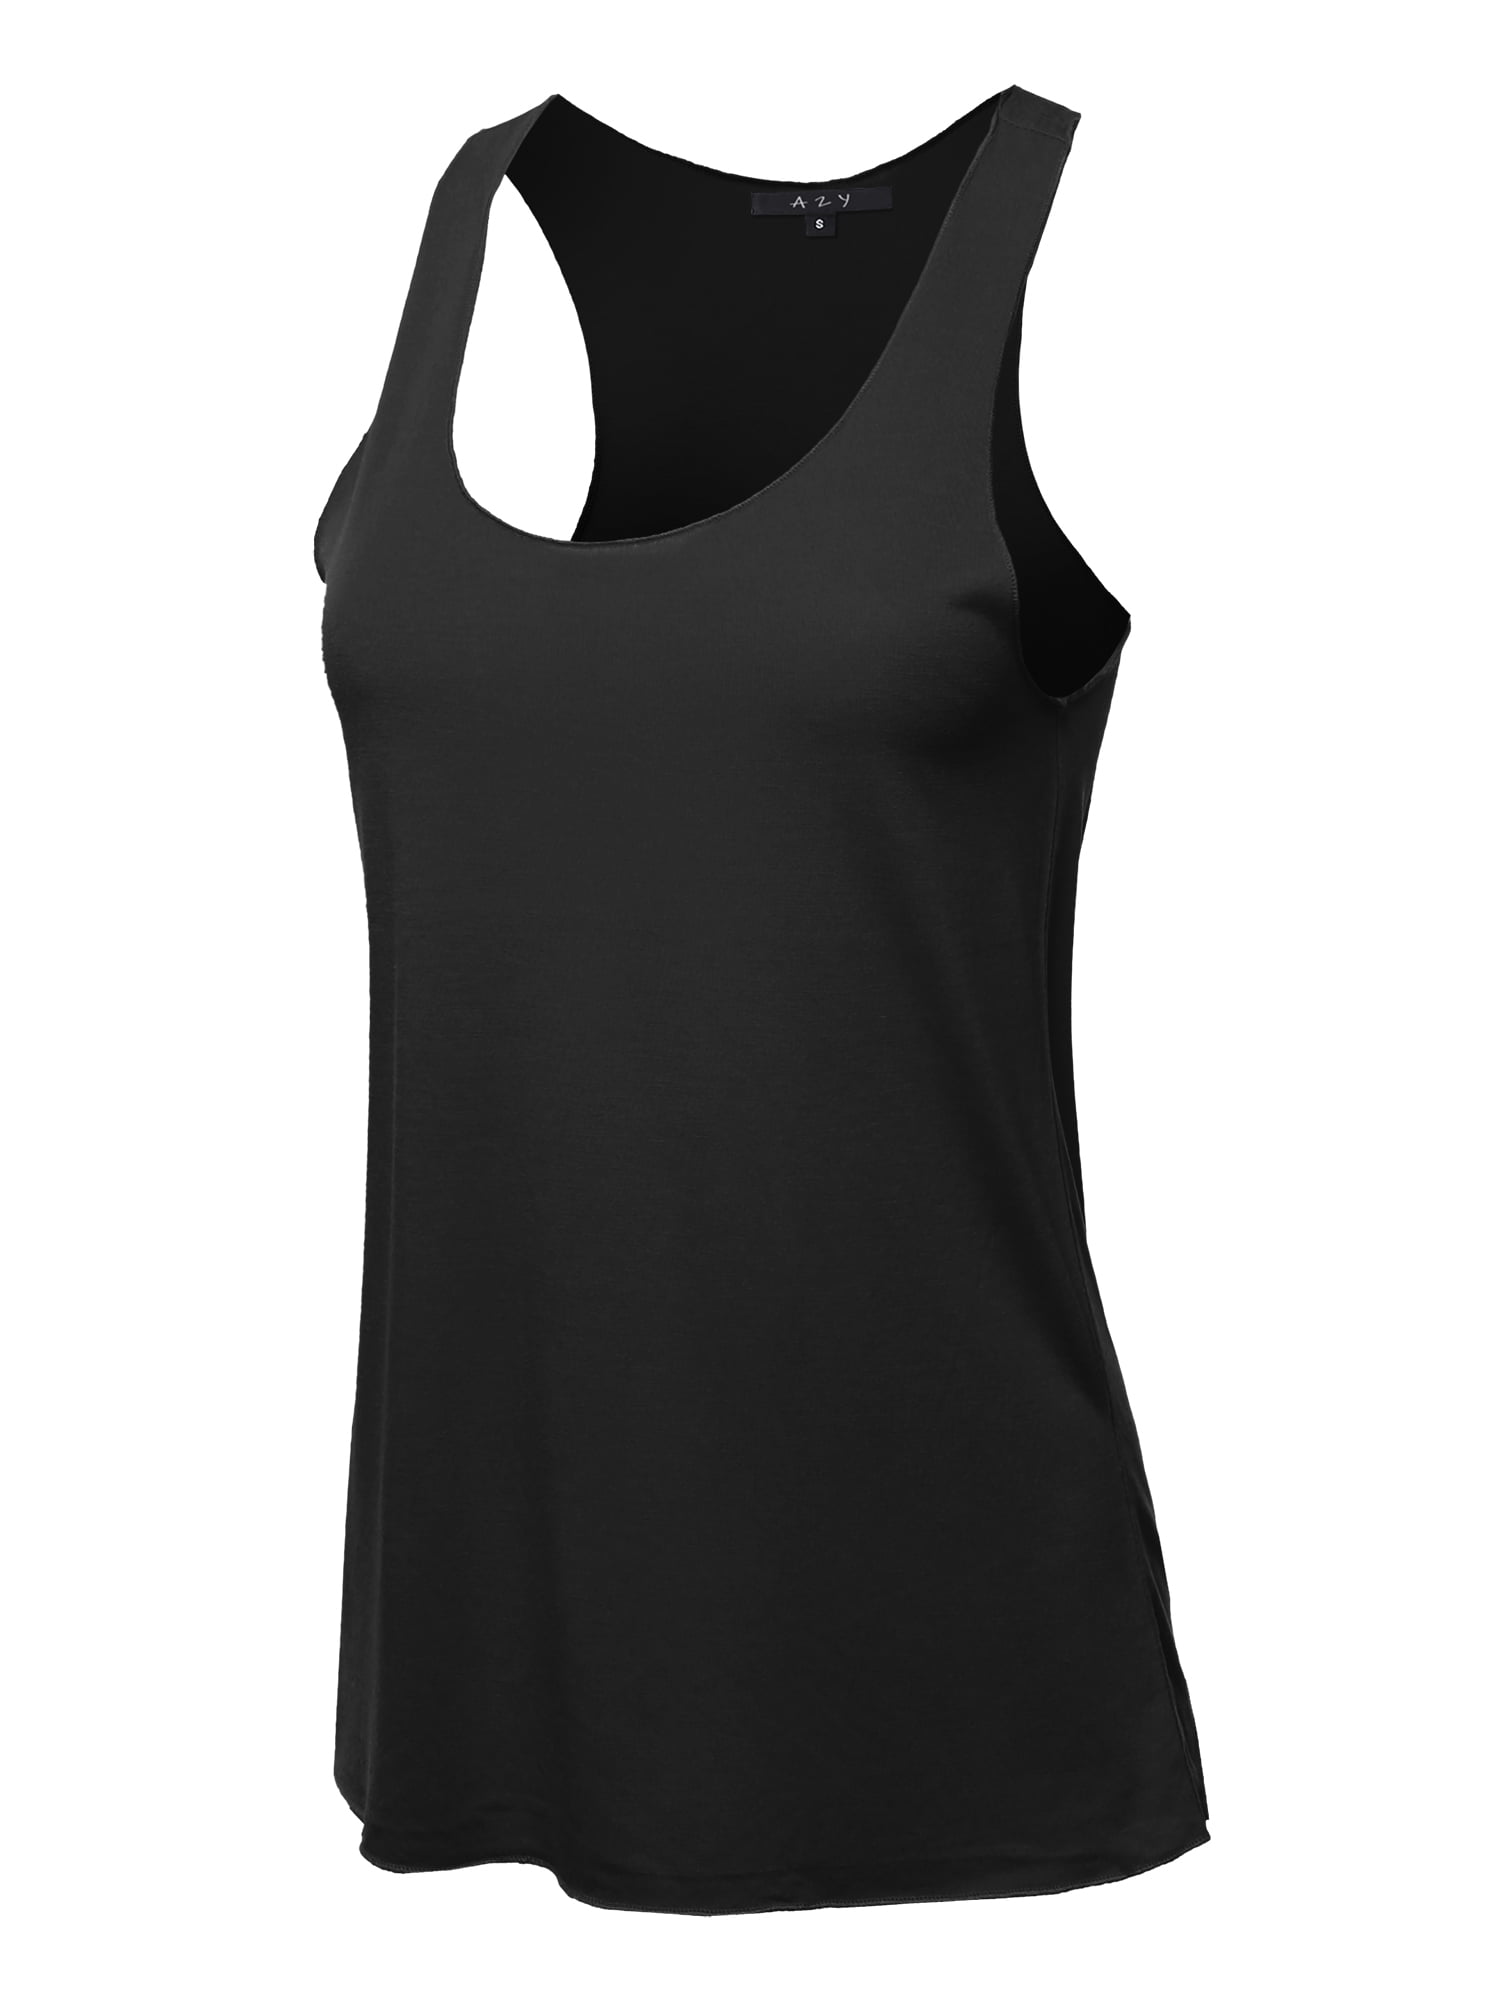 A2Y Women's Basic Solid Loose Fit Flowy Scoop Neck Racer Back Tank Top ...